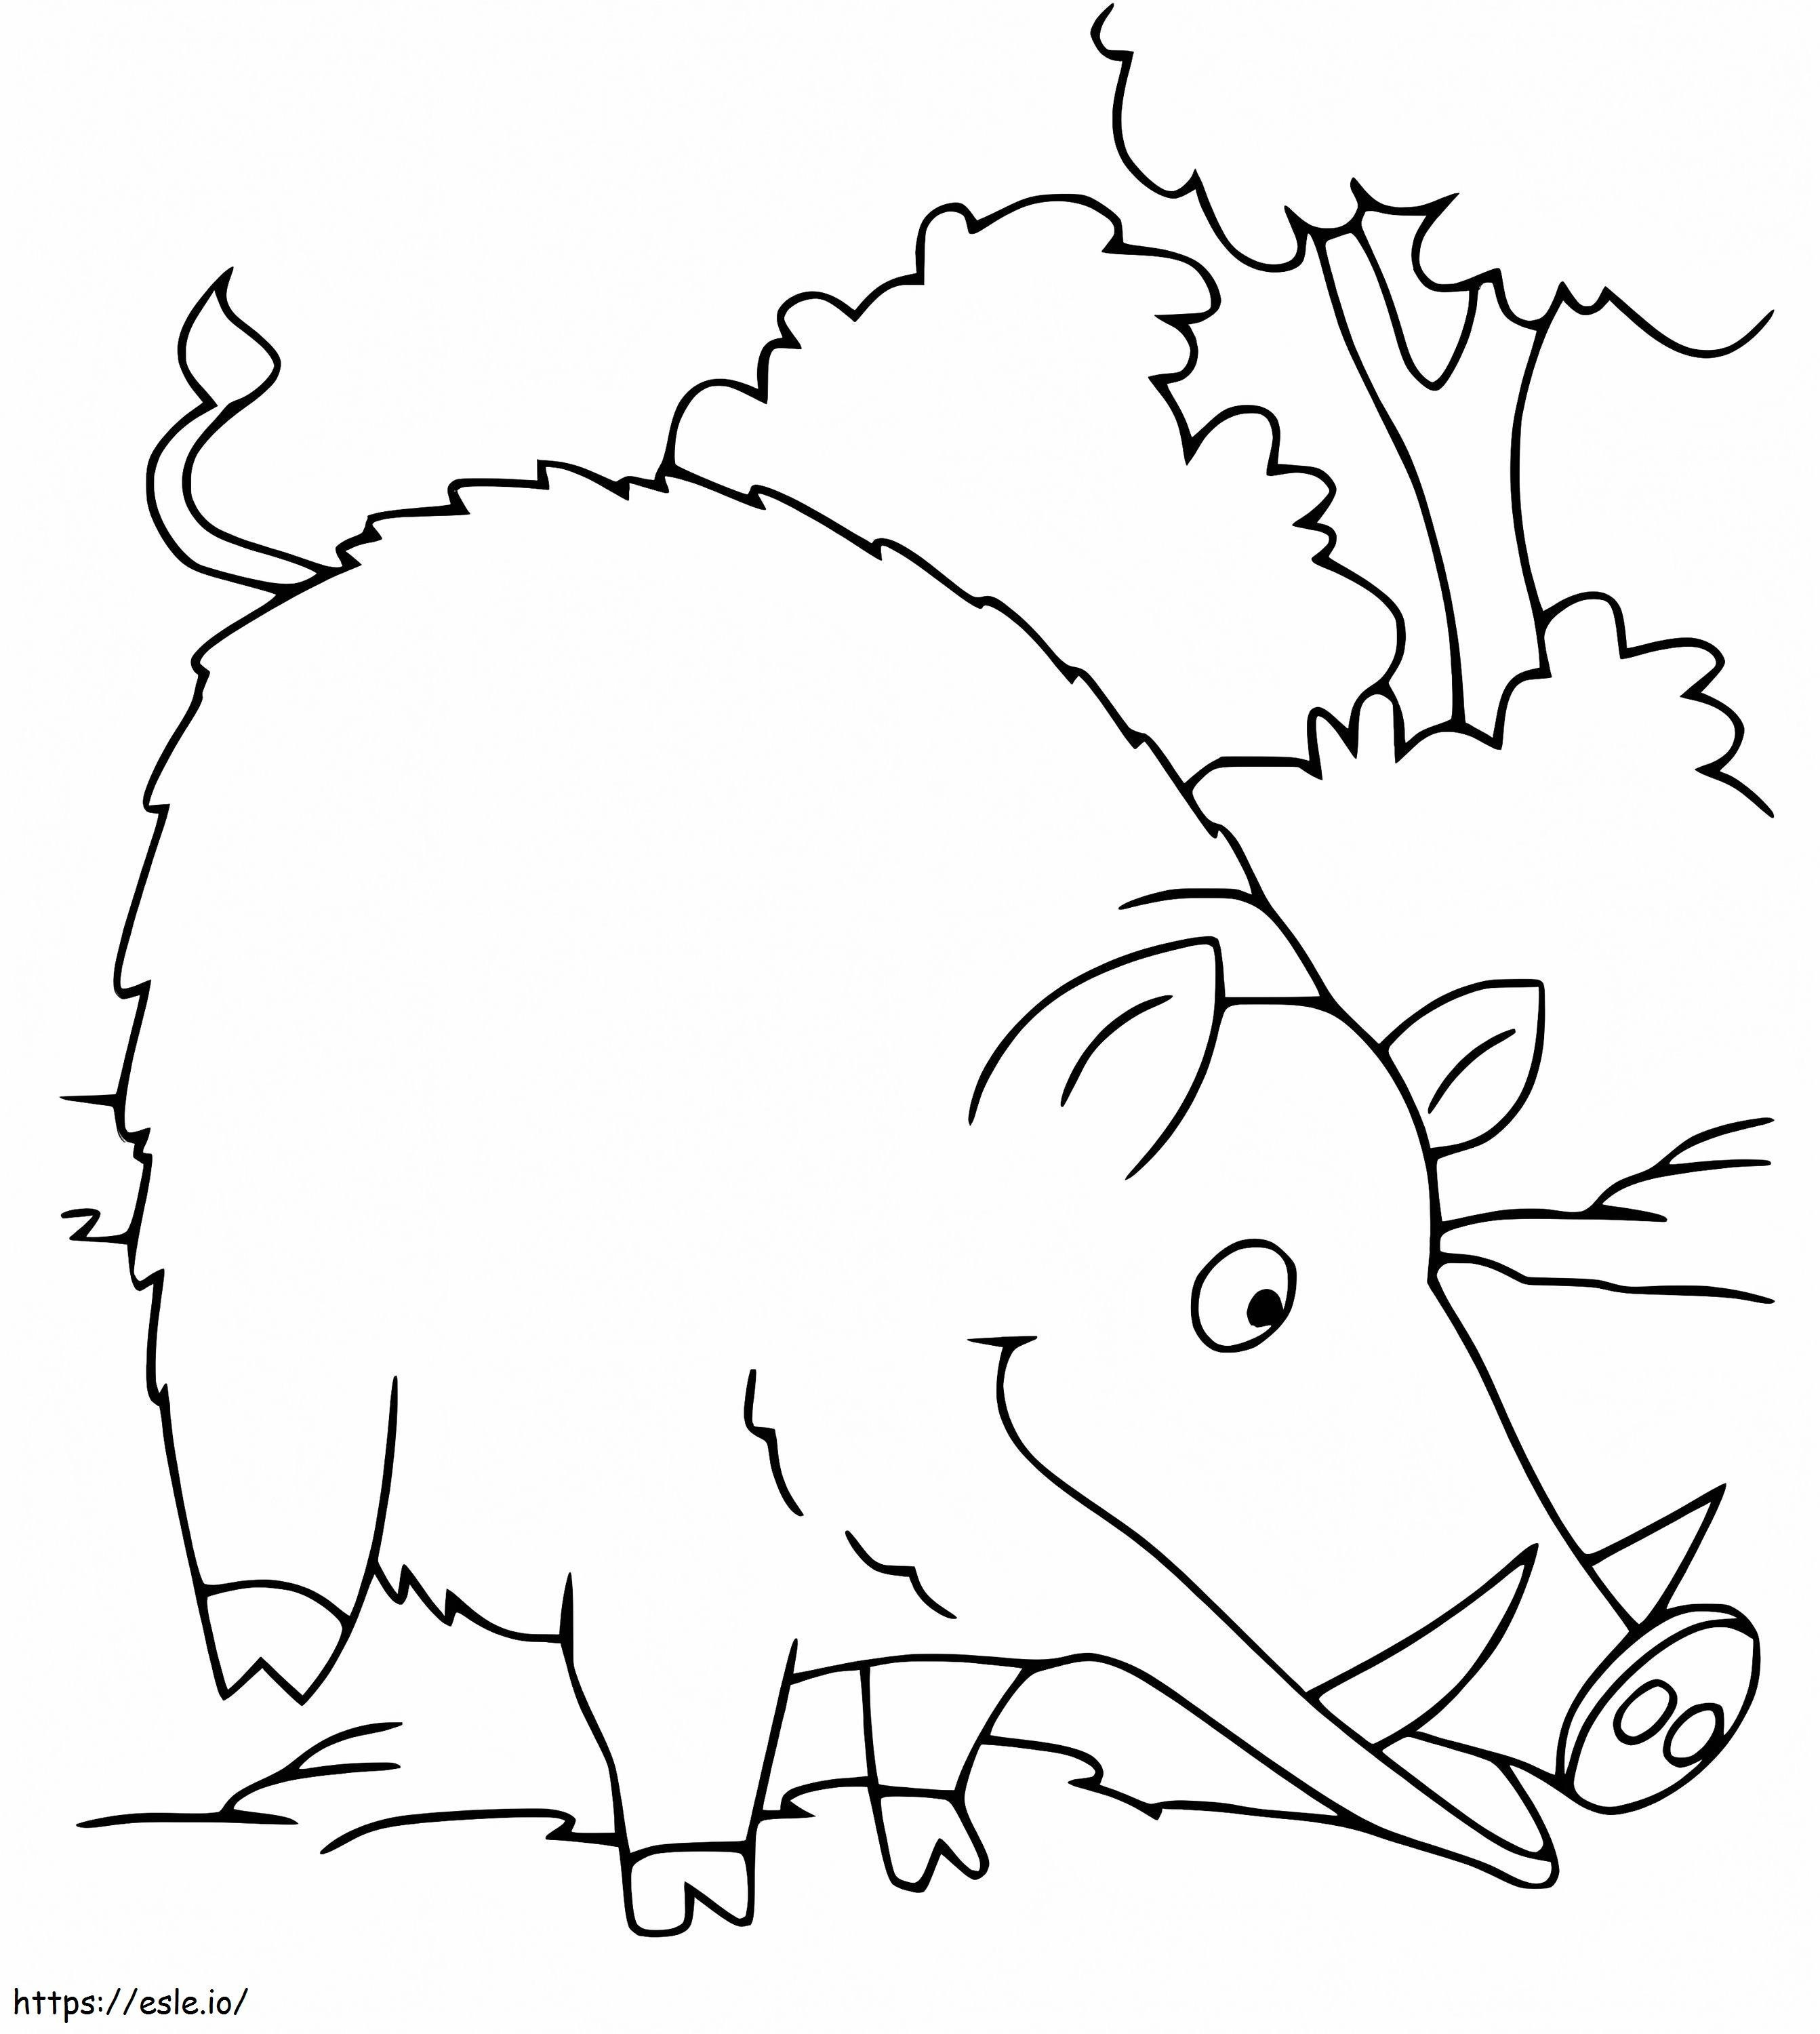 Basic Wild Board coloring page